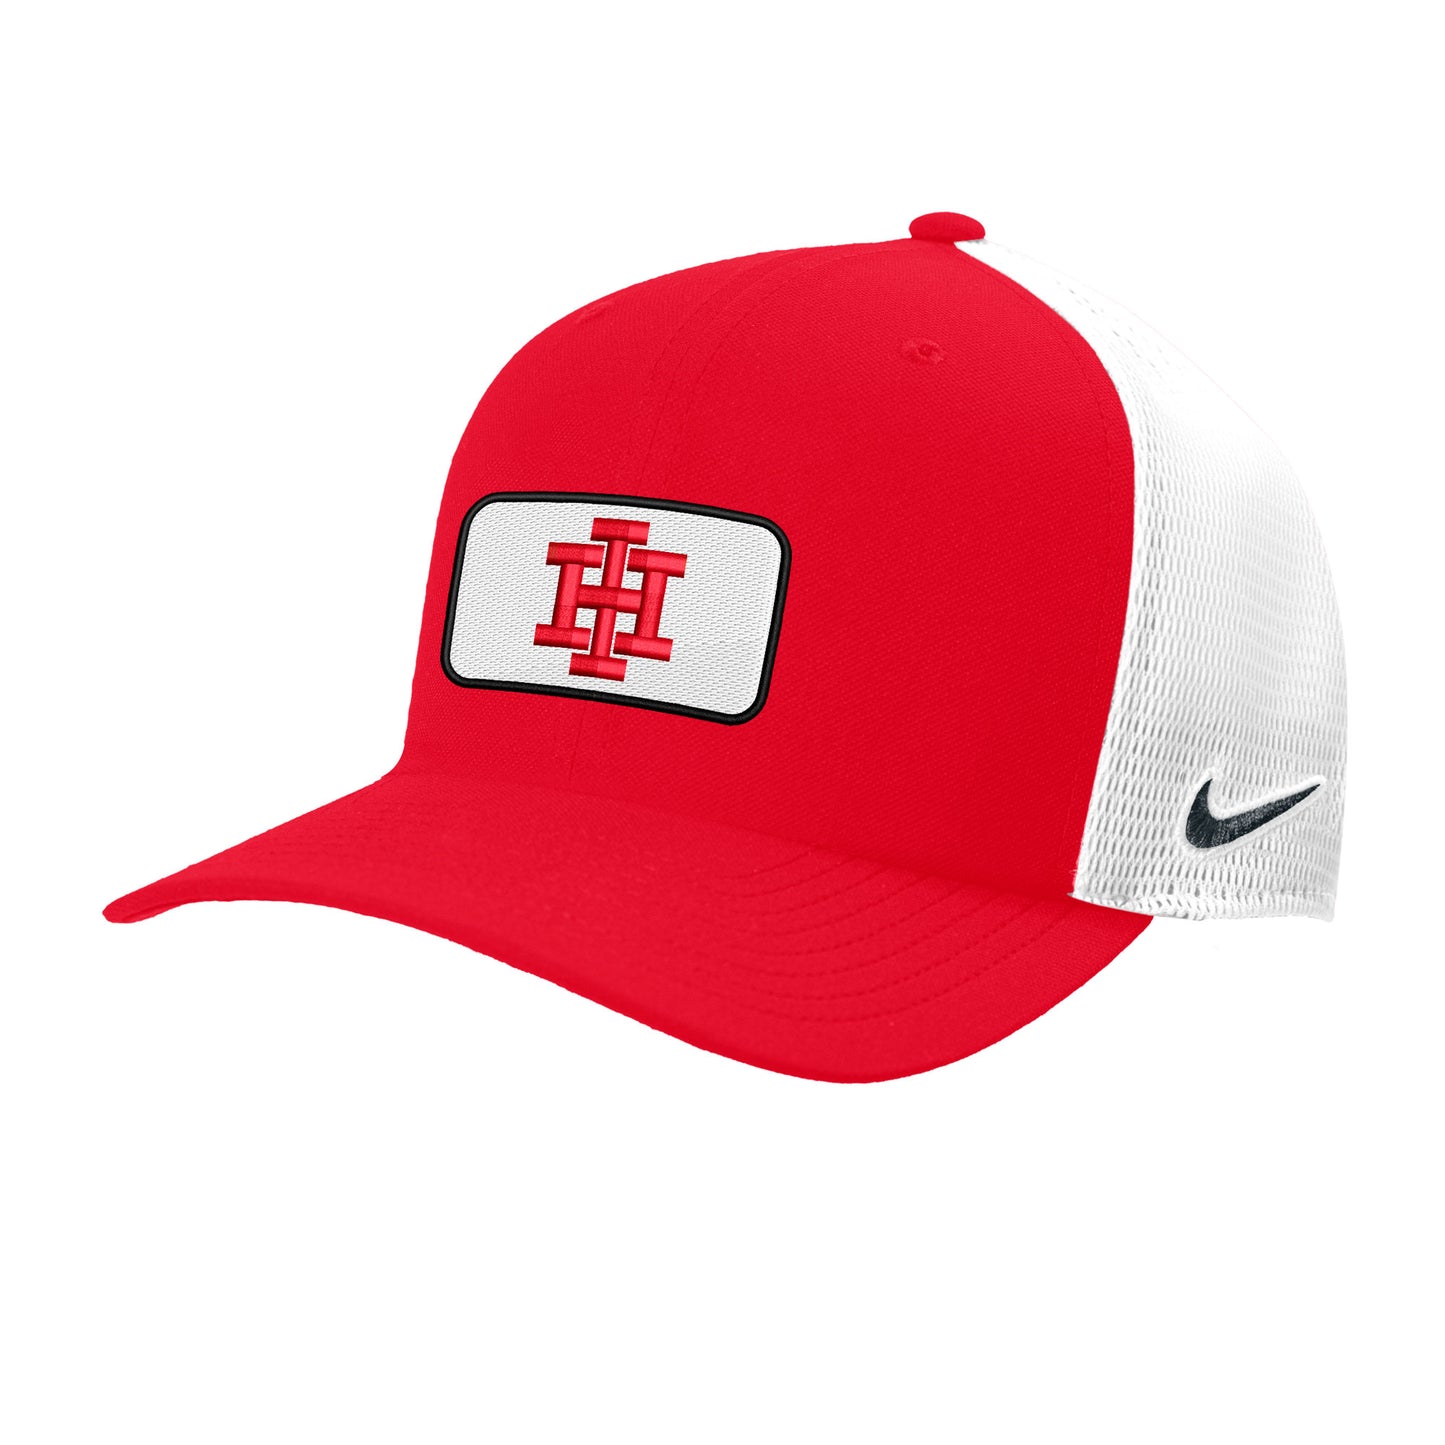 Nike Trucker Hat with Patch